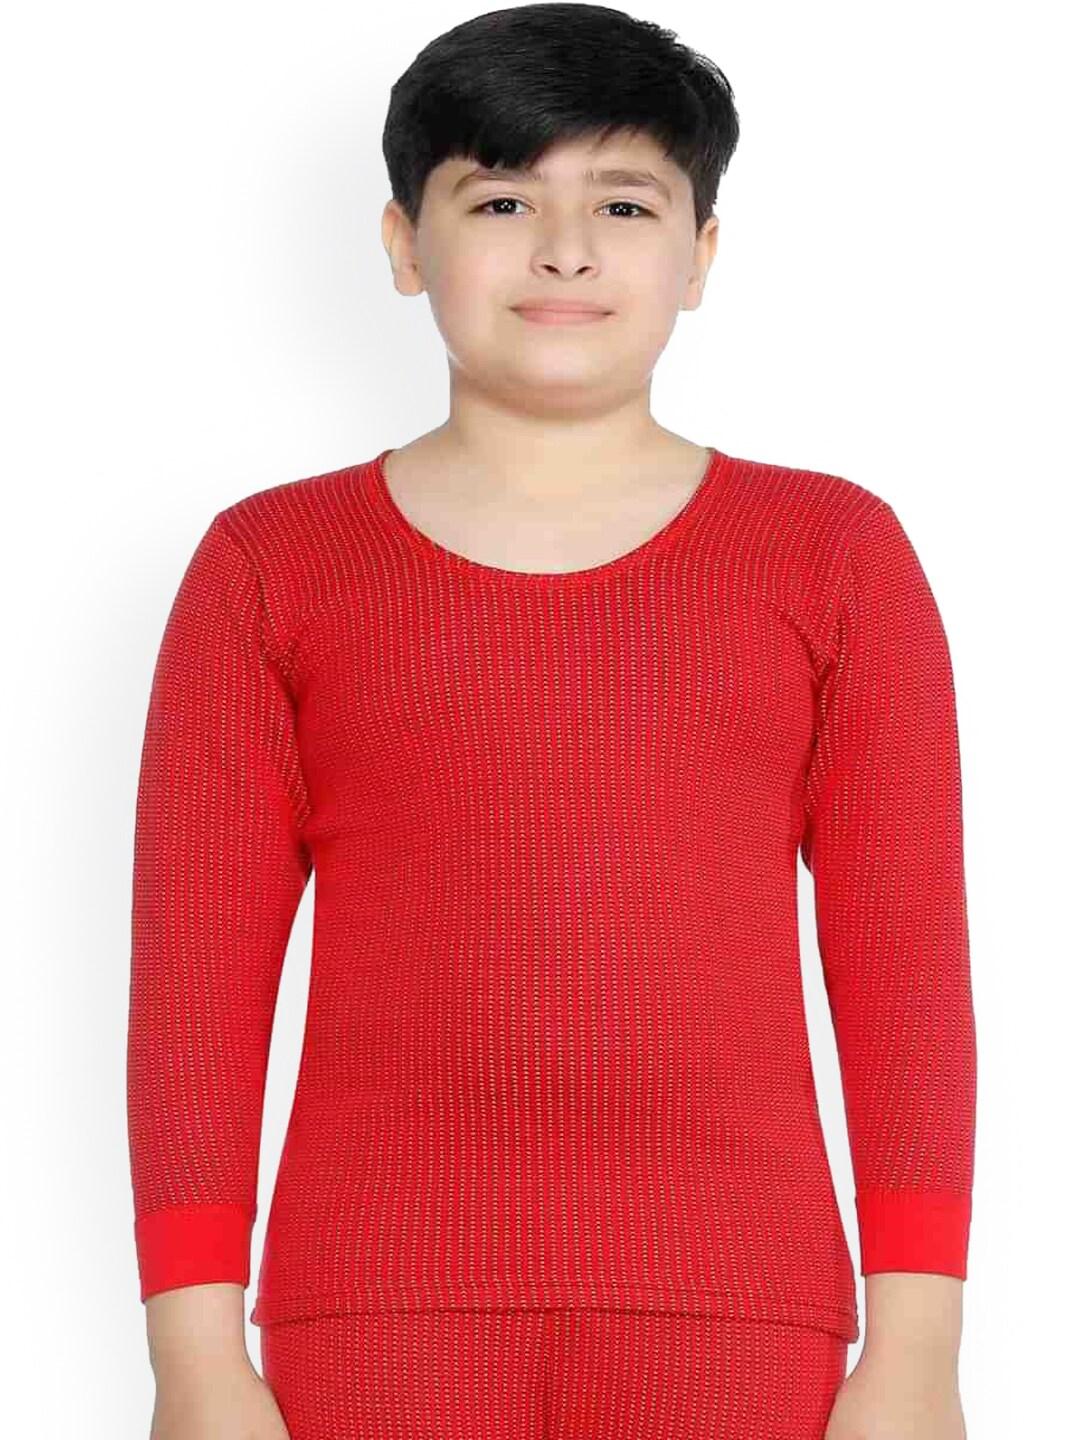 Bodycare Kids Boys Red Solid Cotton Round Neck Thermal Tops